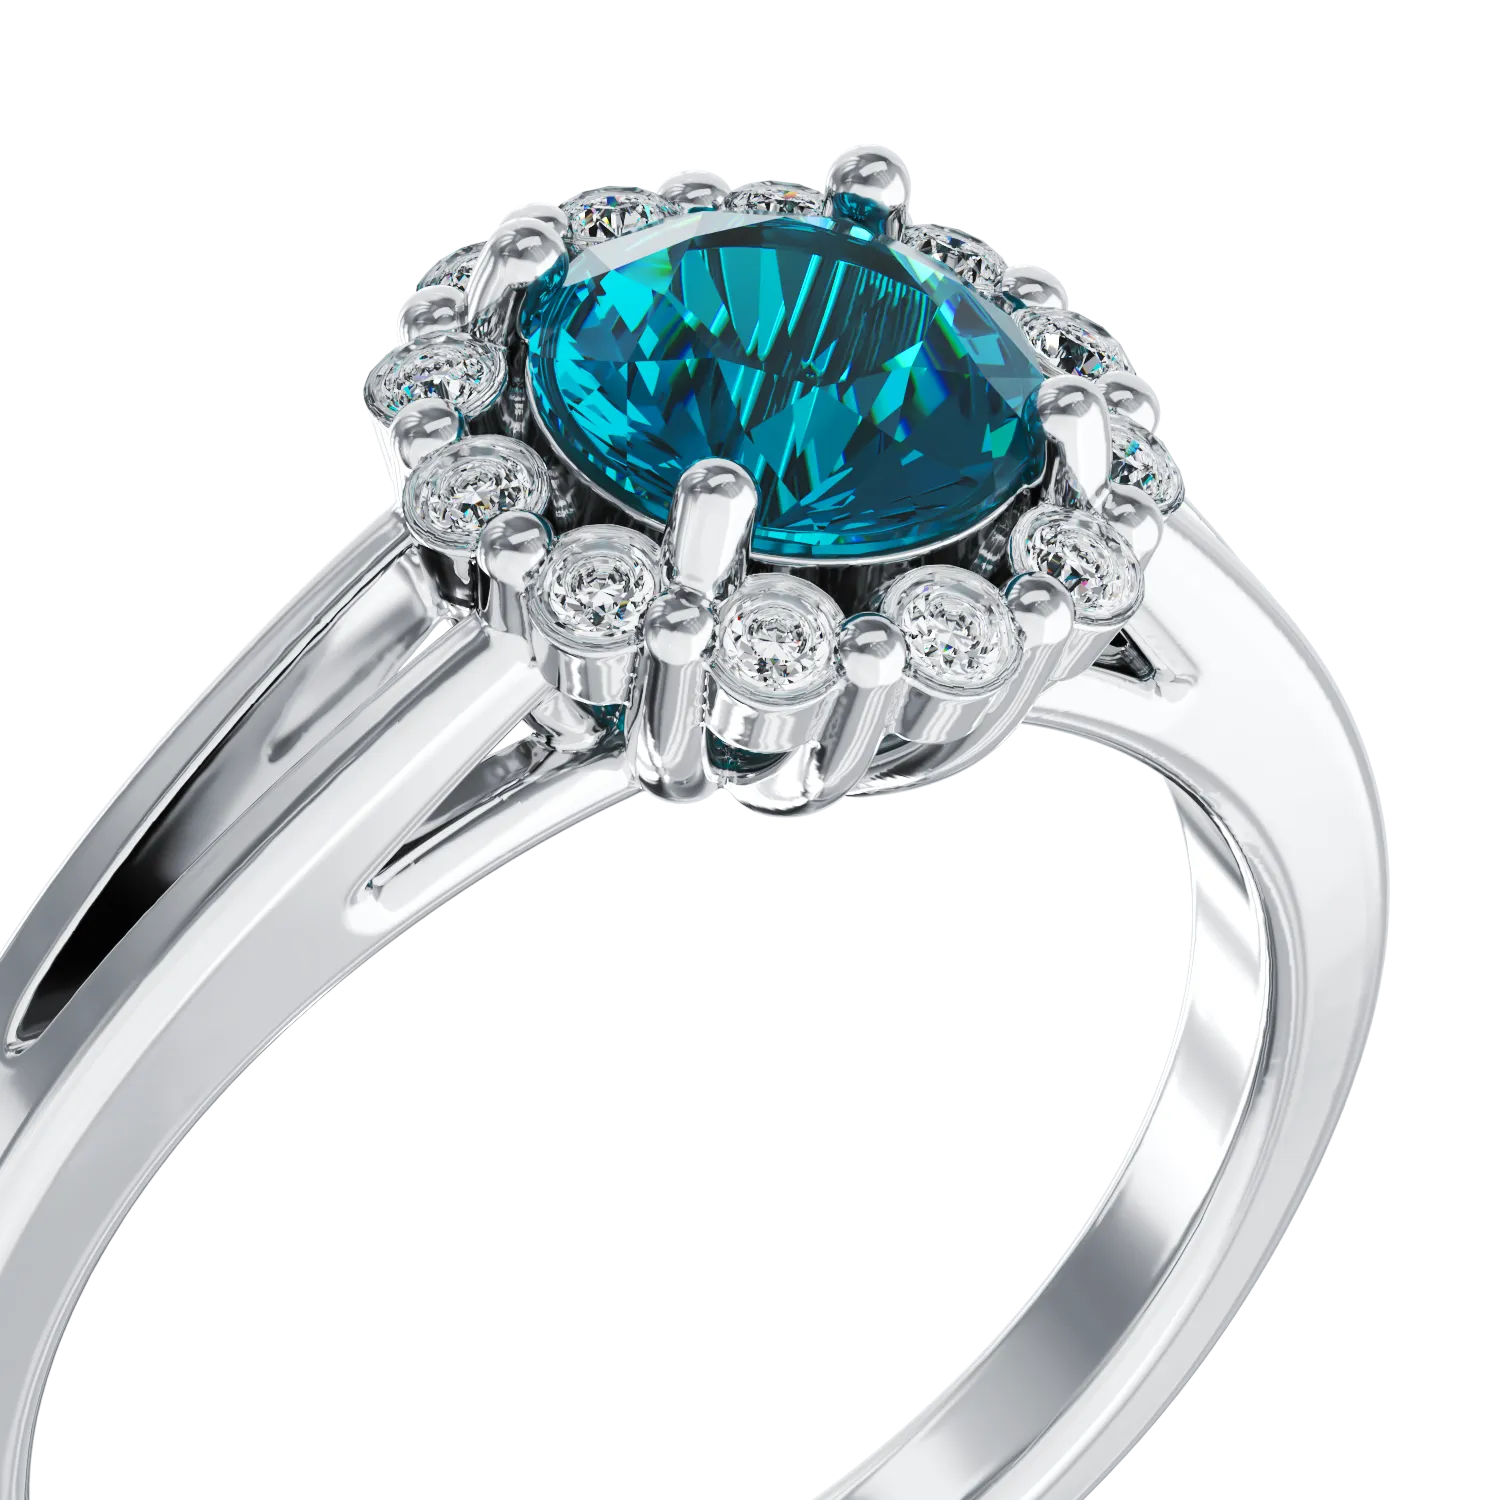 18K white gold engagement ring with blue diamond of 0.55ct and diamonds of 0.18ct